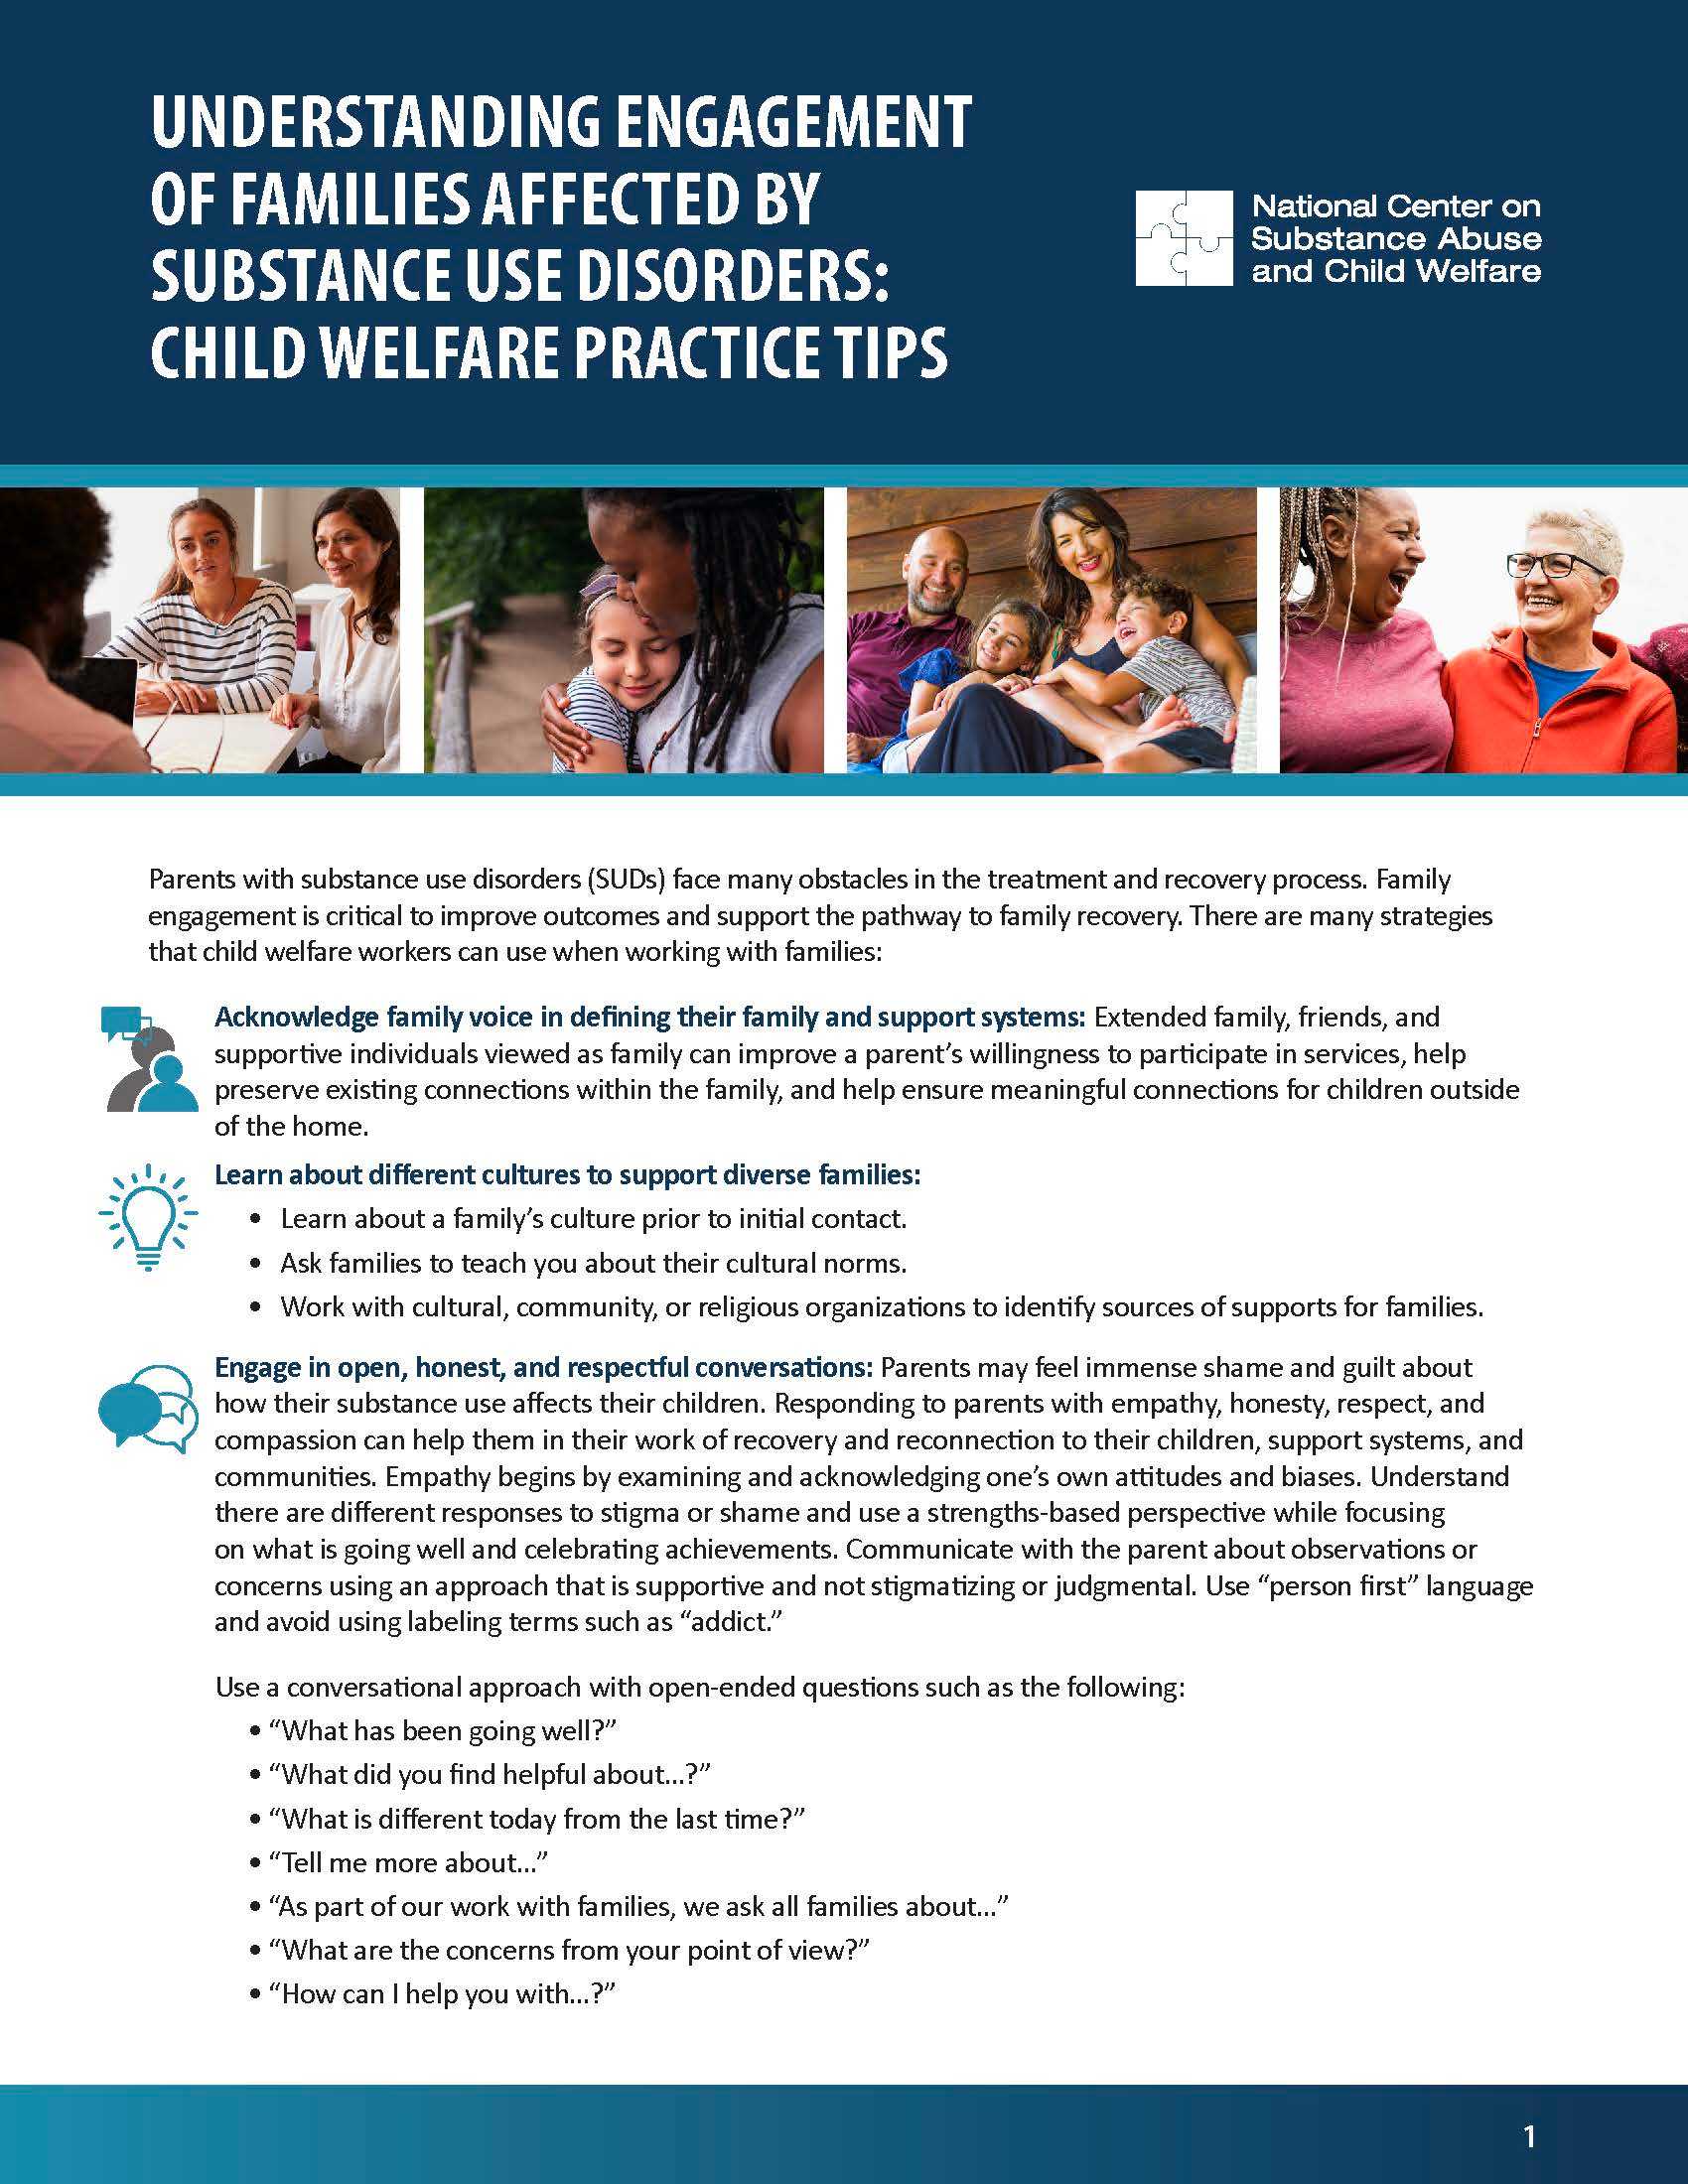 Understanding Engagement of Families Affected by Substance Use Disorders – Child Welfare Practice Tips